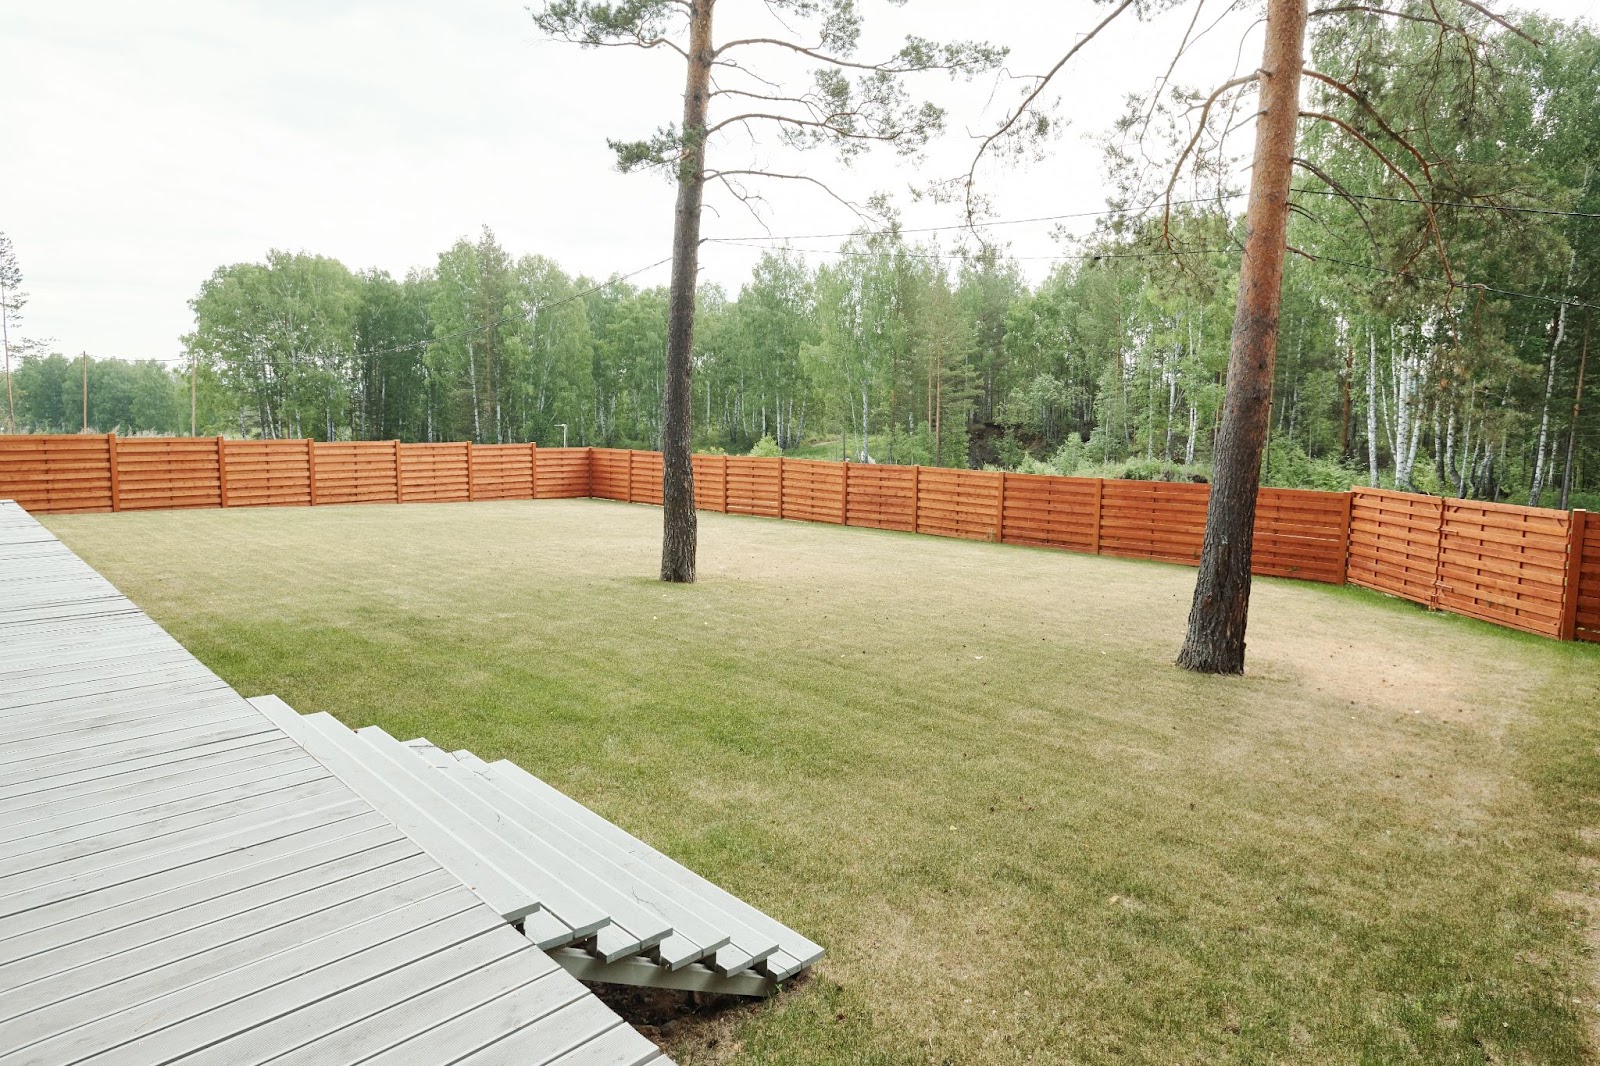 A spacious backyard, surrounded by a brown fence, provides ample room for relaxation and outdoor activities, offering a serene environment for enjoying nature's beauty.